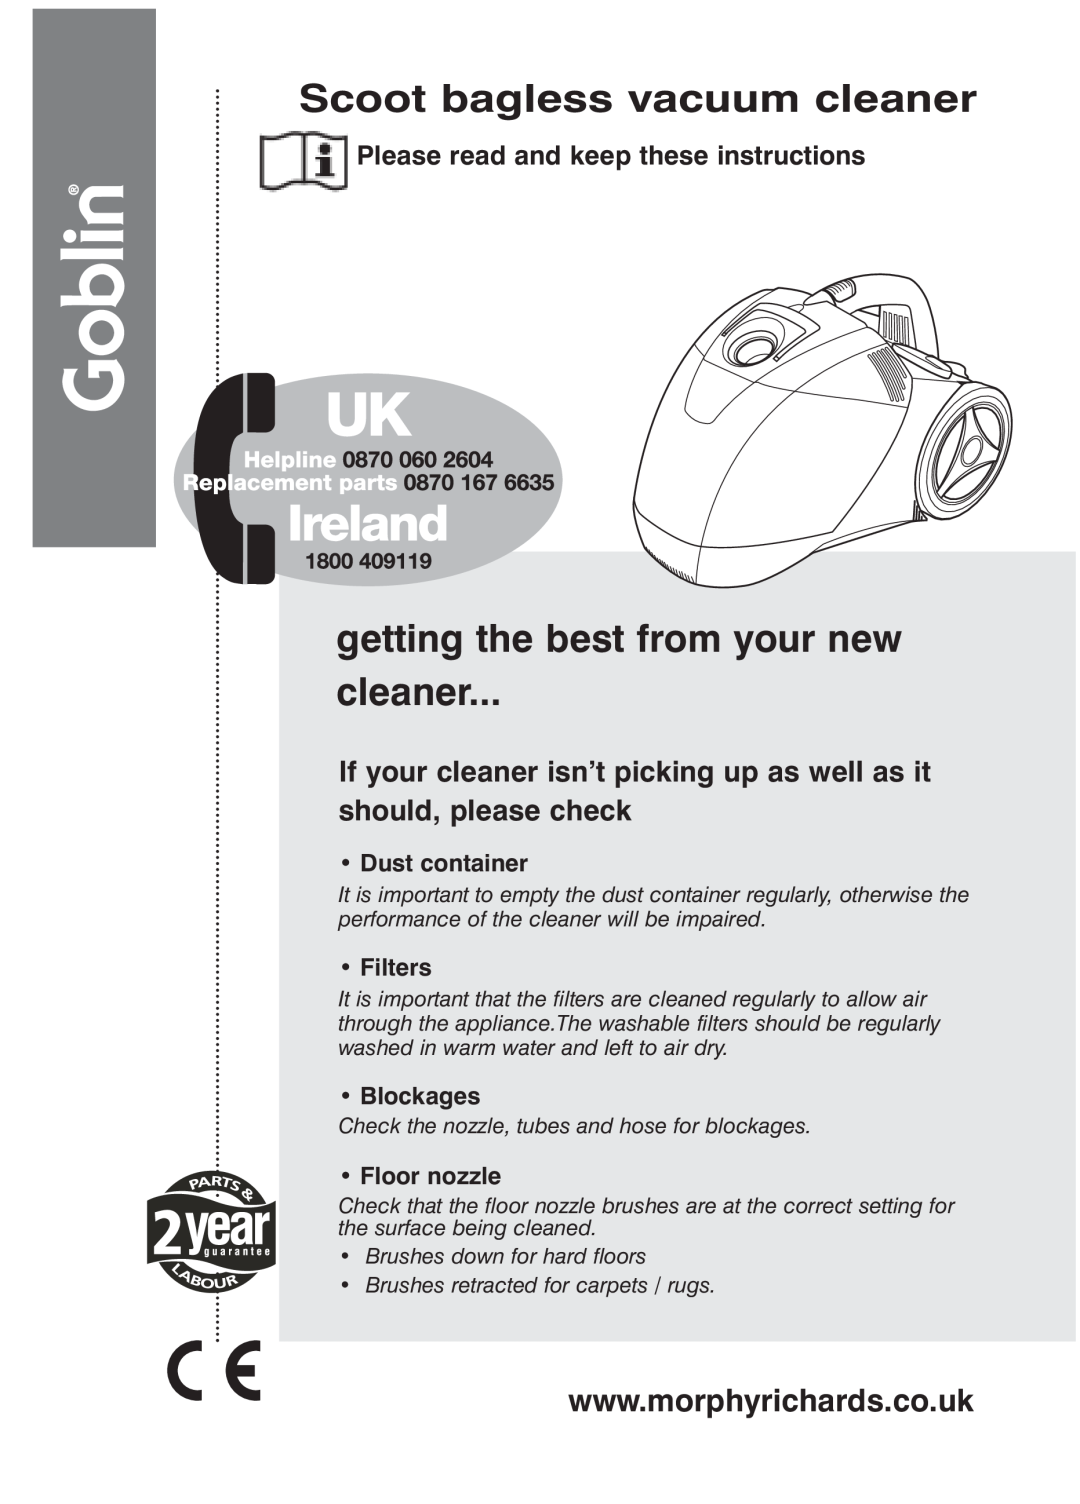 Morphy Richards Scoot bagless vacuum cleaner manual getting the best from your new cleaner, Dust container, Filters 